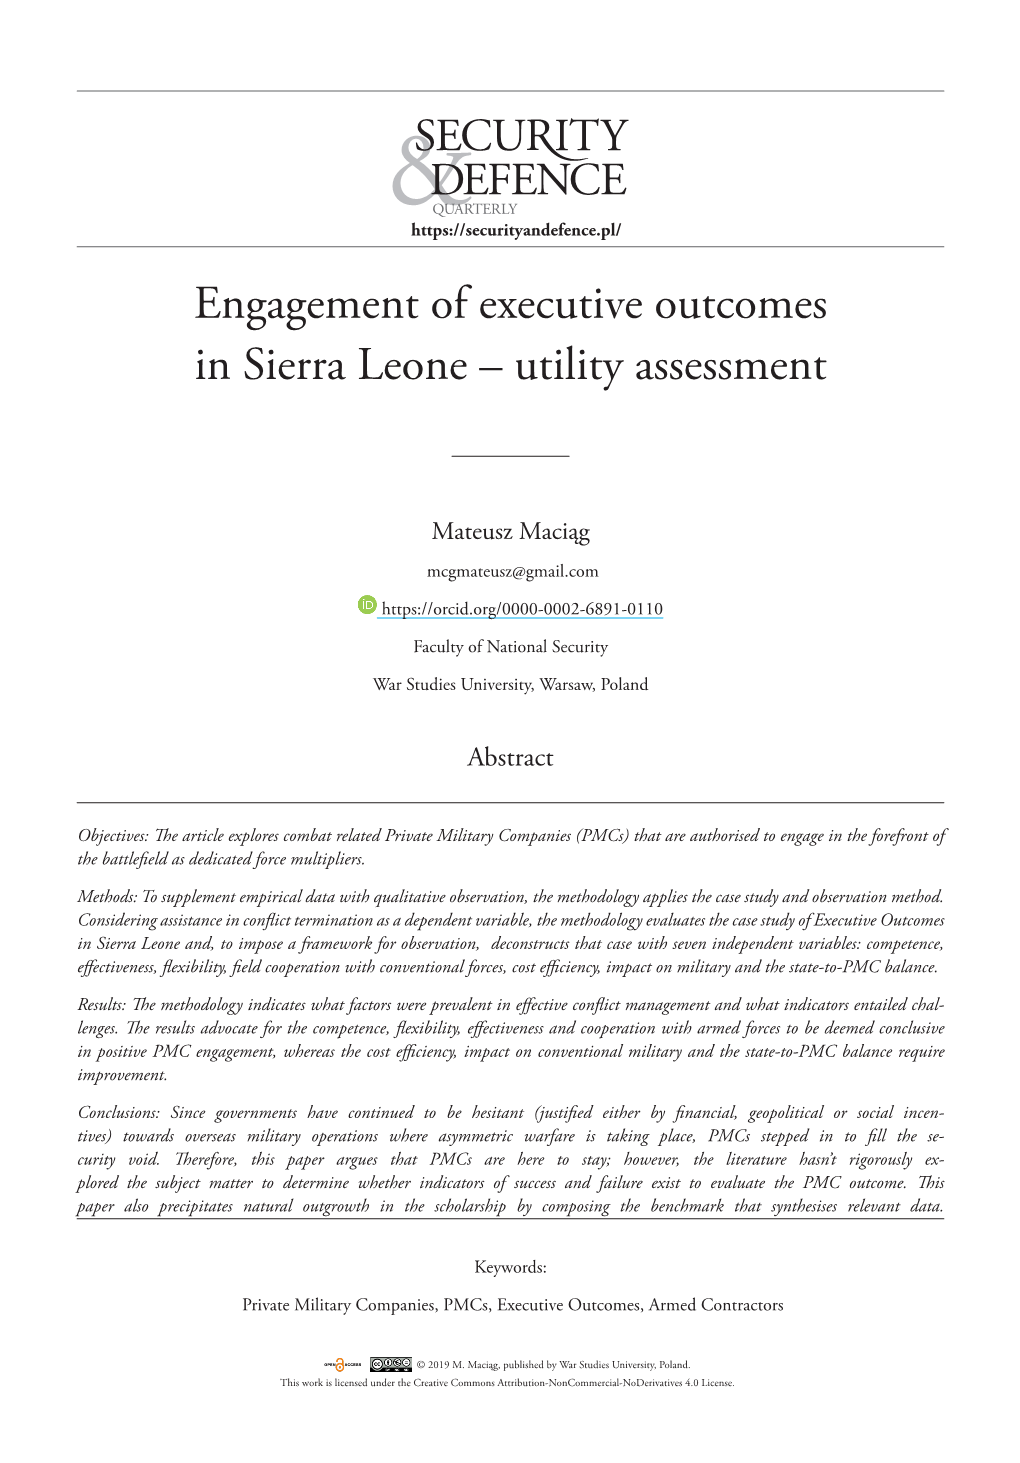 Engagement of Executive Outcomes in Sierra Leone – Utility Assessment